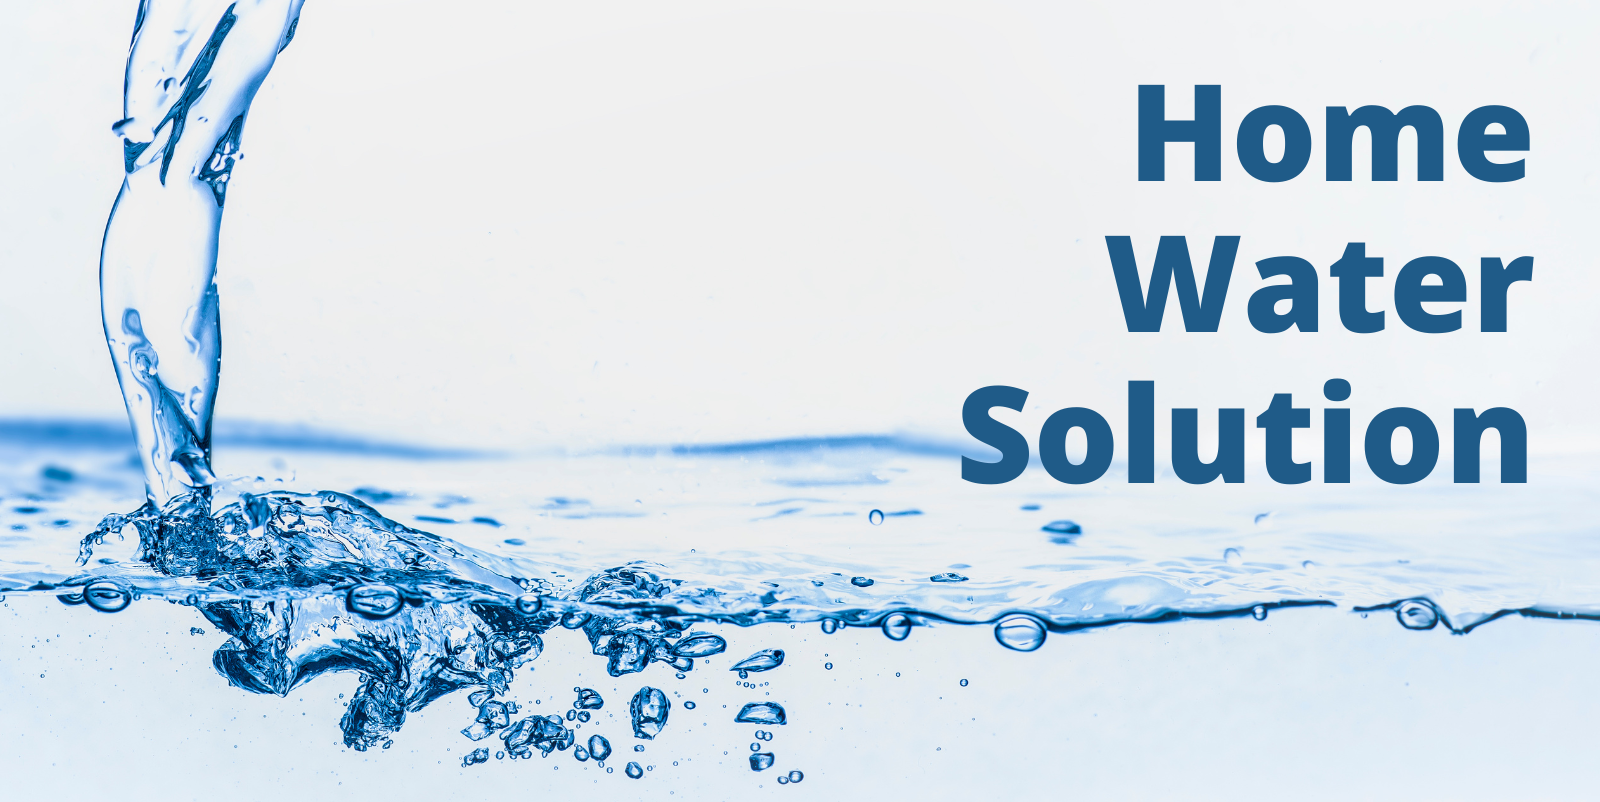 6 Home water solution:The Future of Home Water Usage: Trends and Innovations”